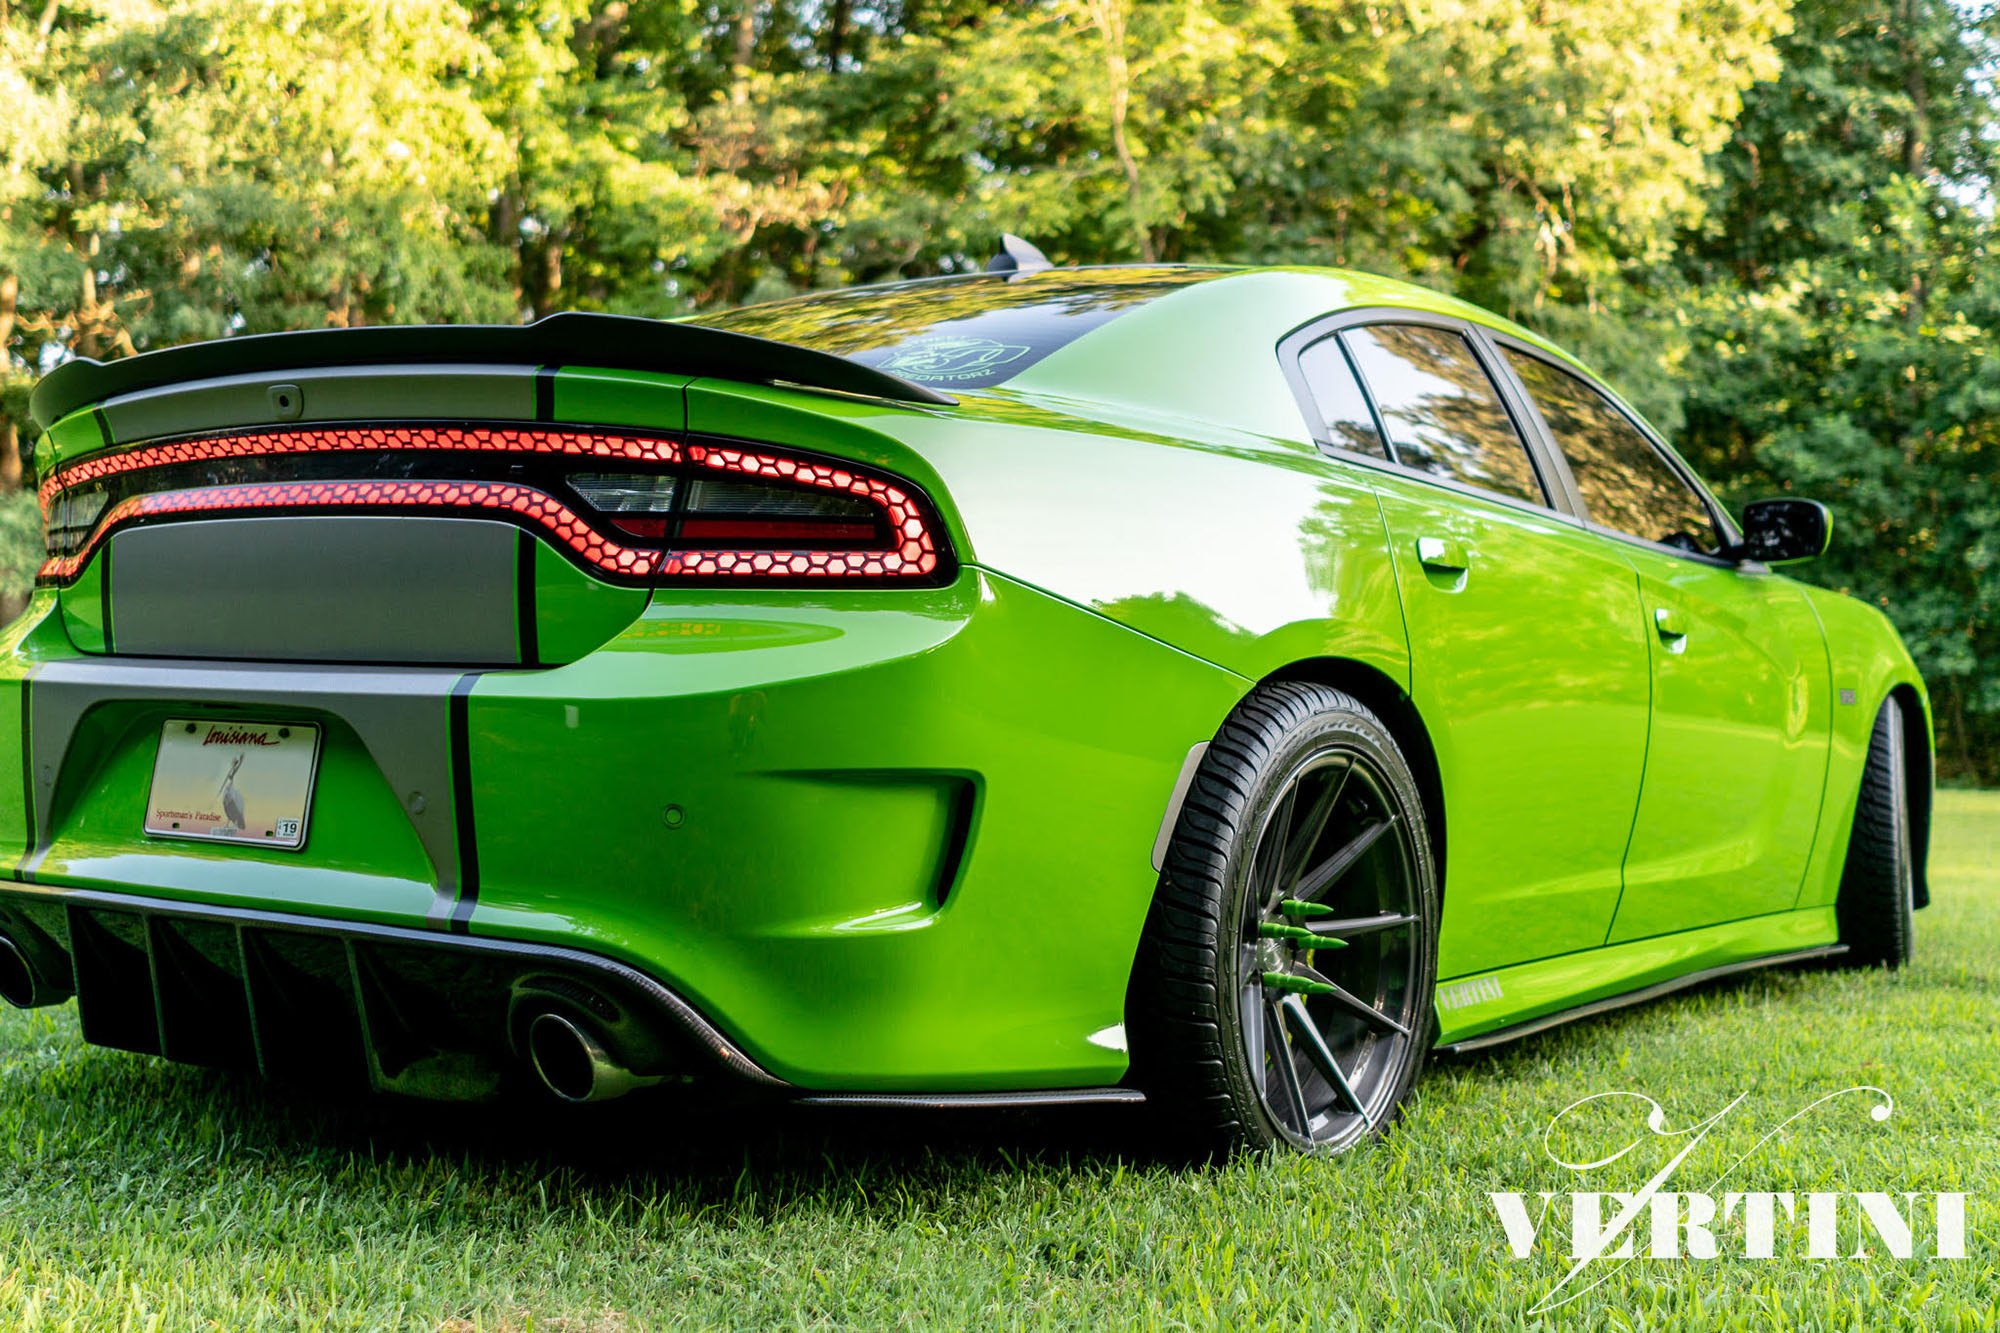 Green Dodge Charger Daytona with Carbon Fiber Rear Diffuser - Photo by Vertini Wheels